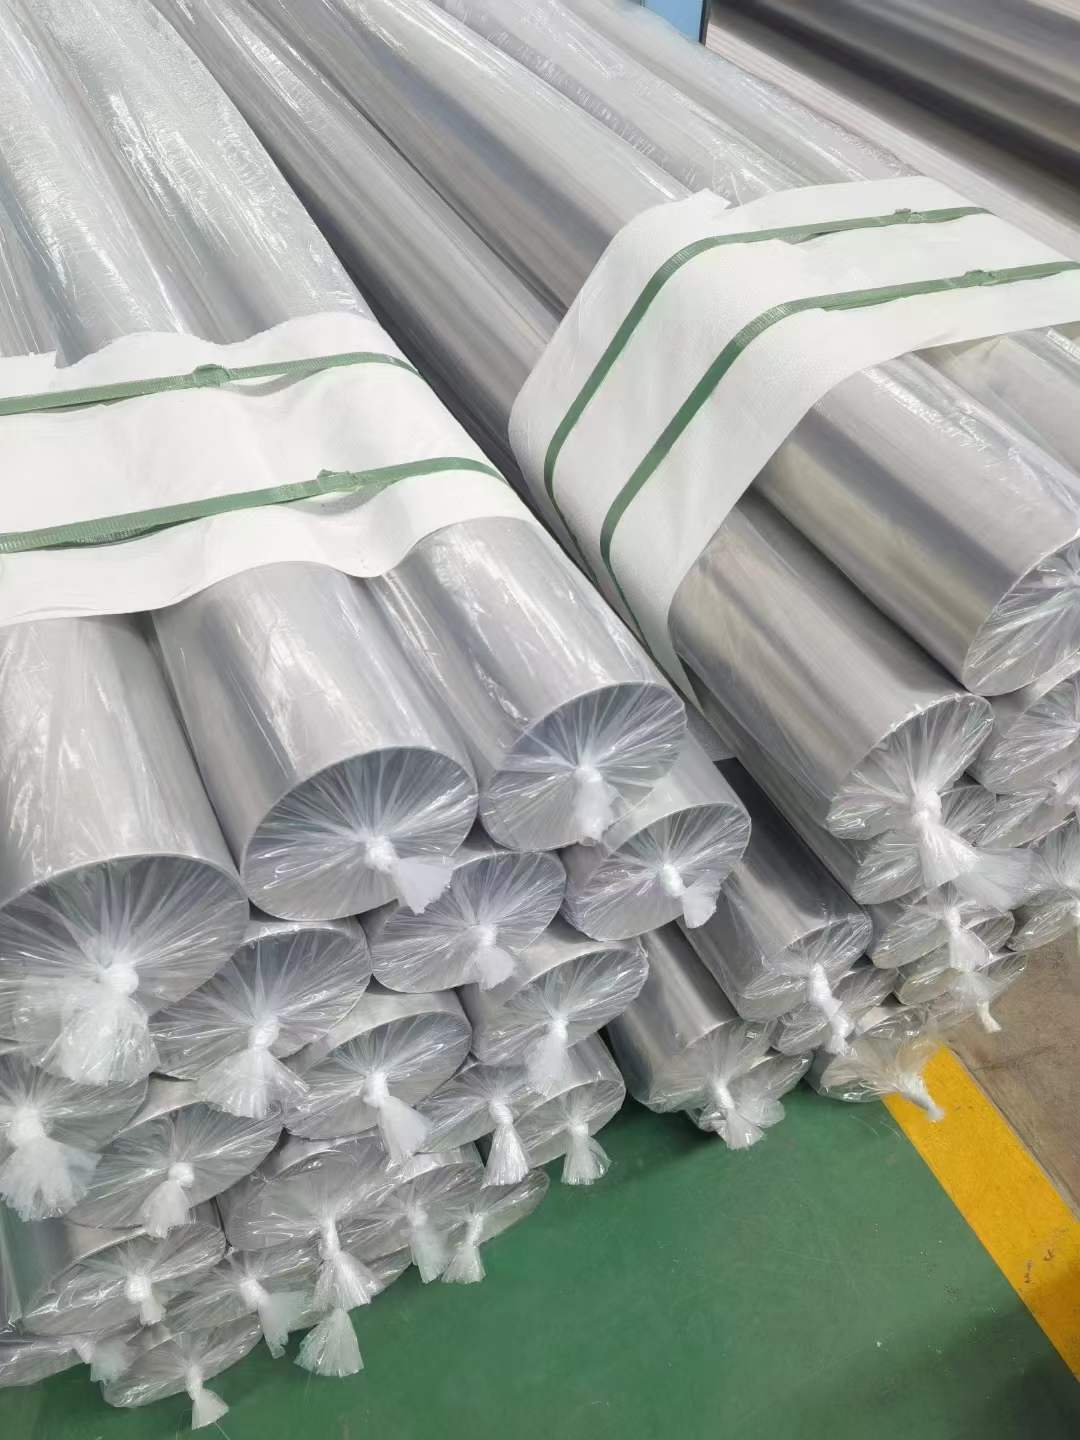 Seamless Stainless Steel Pipe 0cr18ni9 Stainless Steel Pipe For Terrace Glass Railing Astm 201 Stainless Steel 8k Tubes